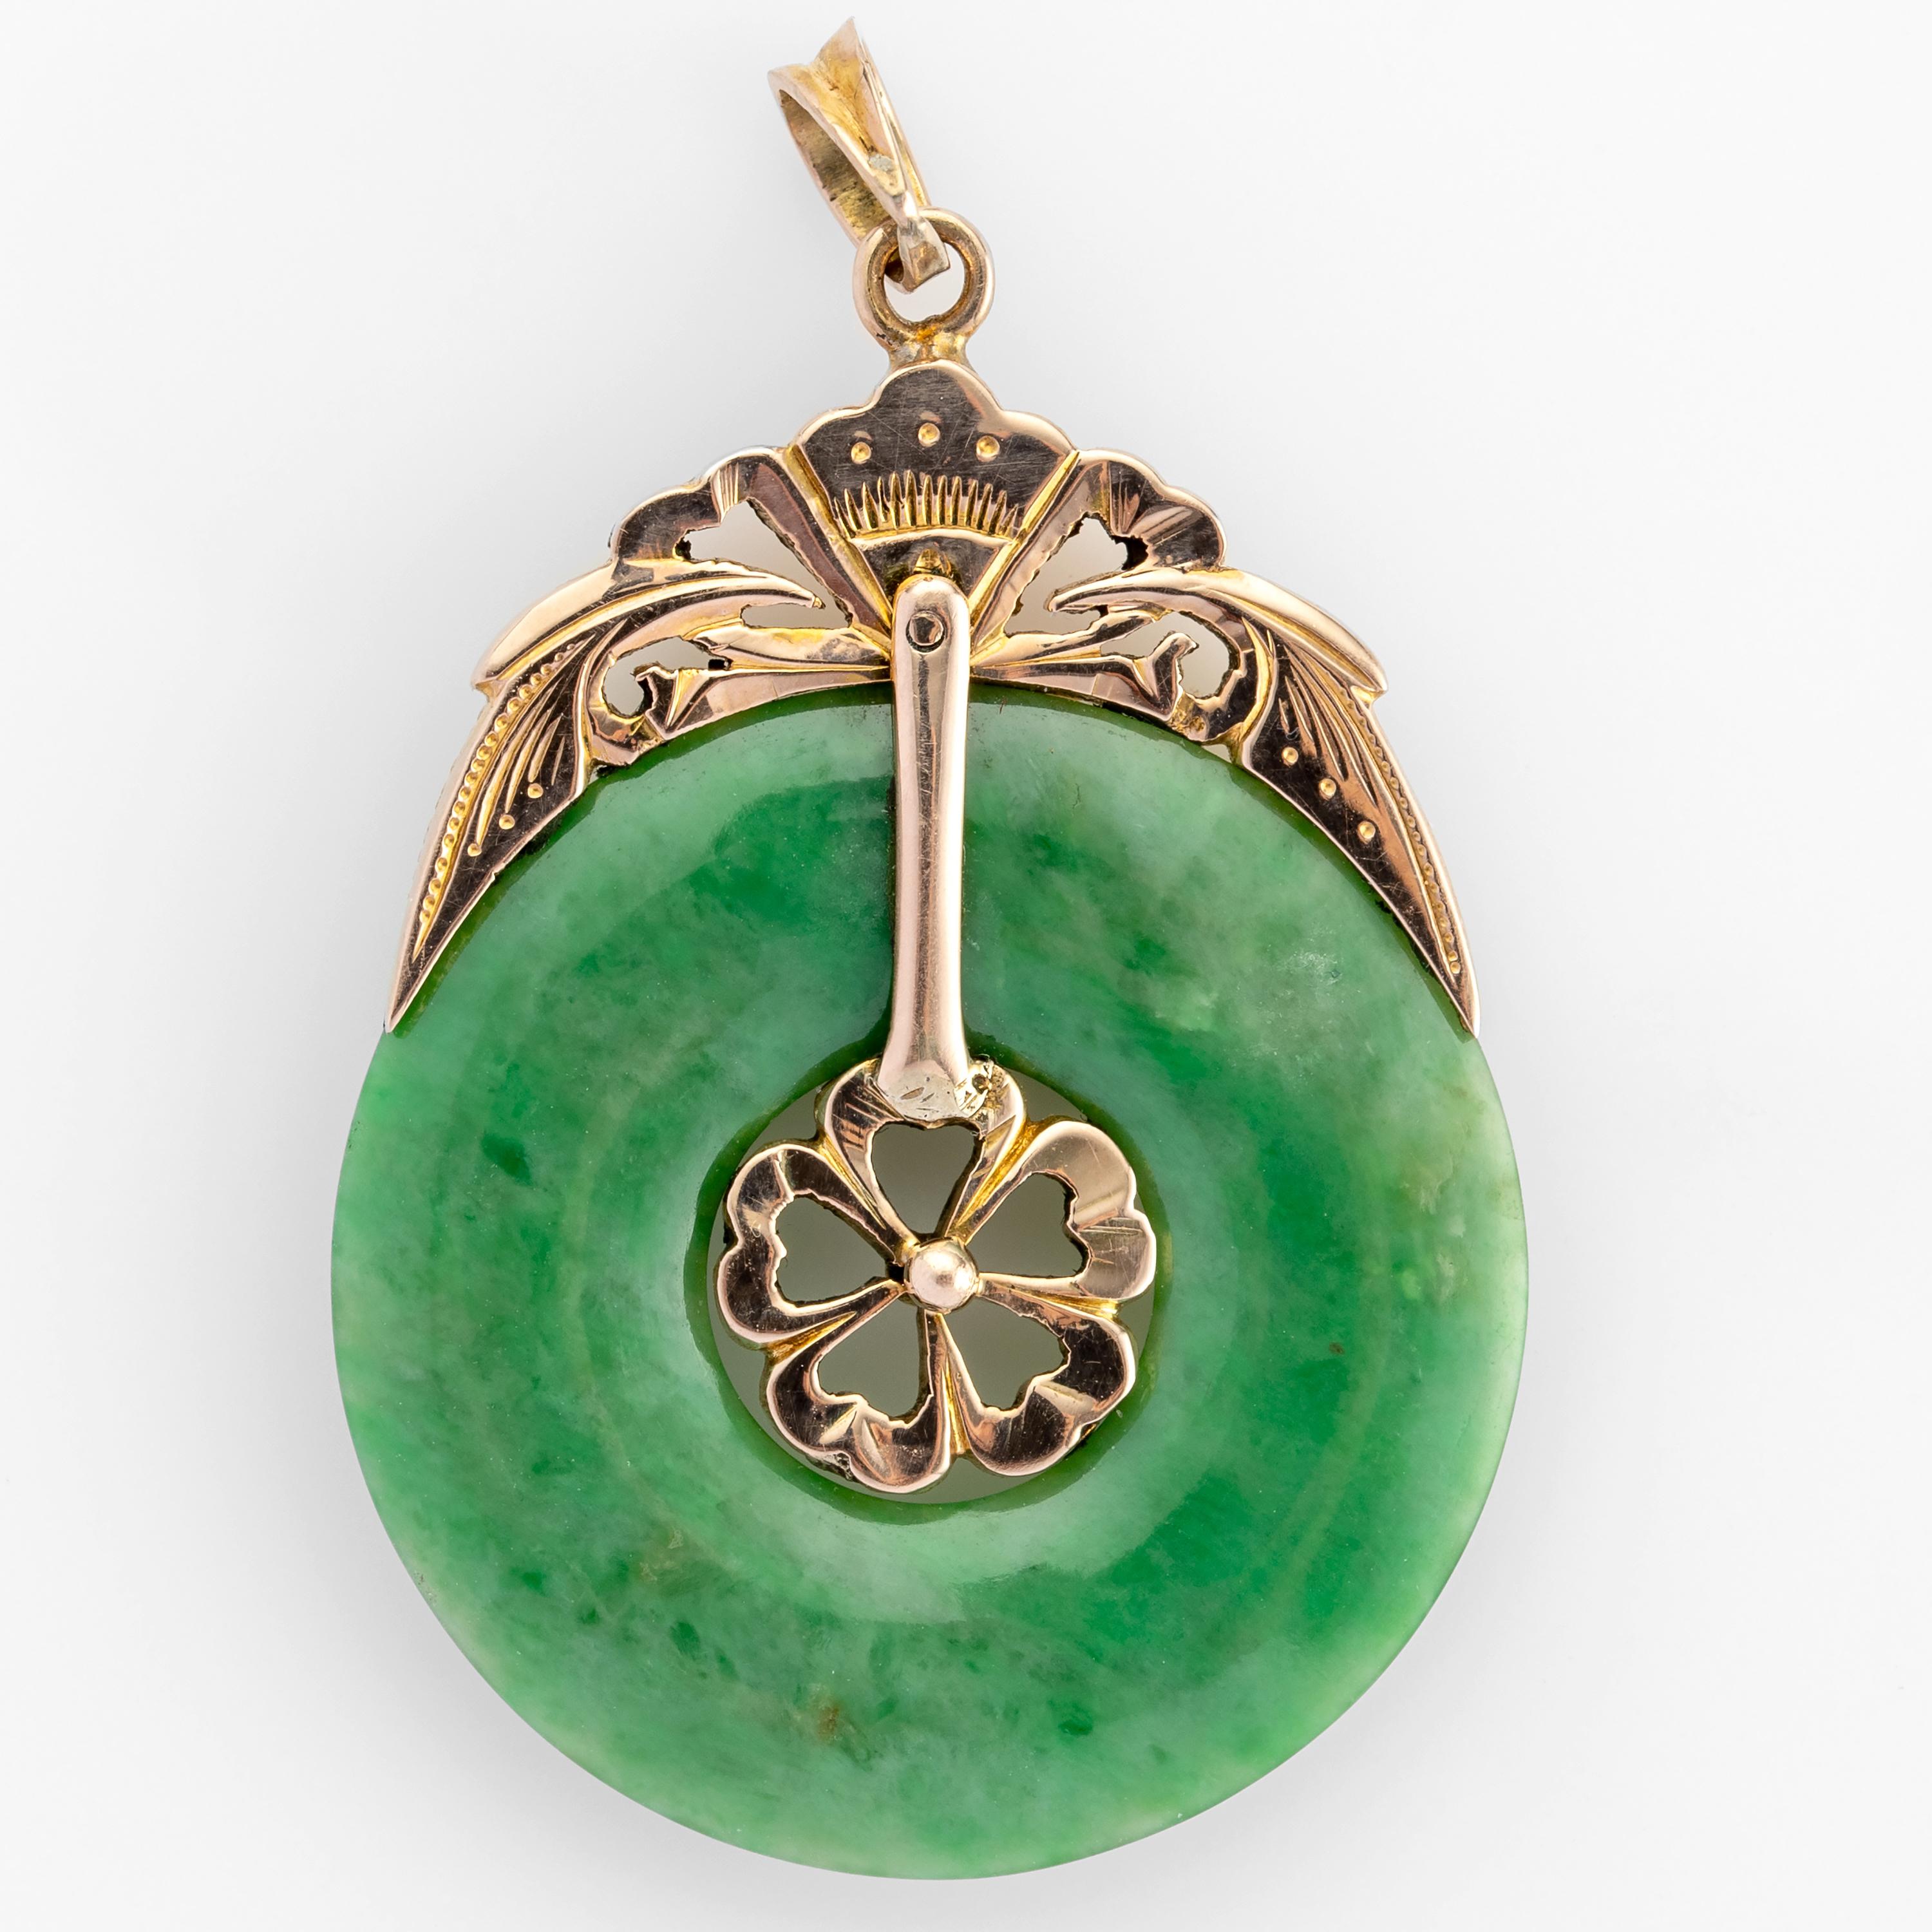 A certified natural and untreated Burmese jadeite jade hololith (a ring made from one piece of stone) is adorned with a handmade 18K rose gold bail that attaches to the jade through the clever design of five hearts in the central hole. The rest of